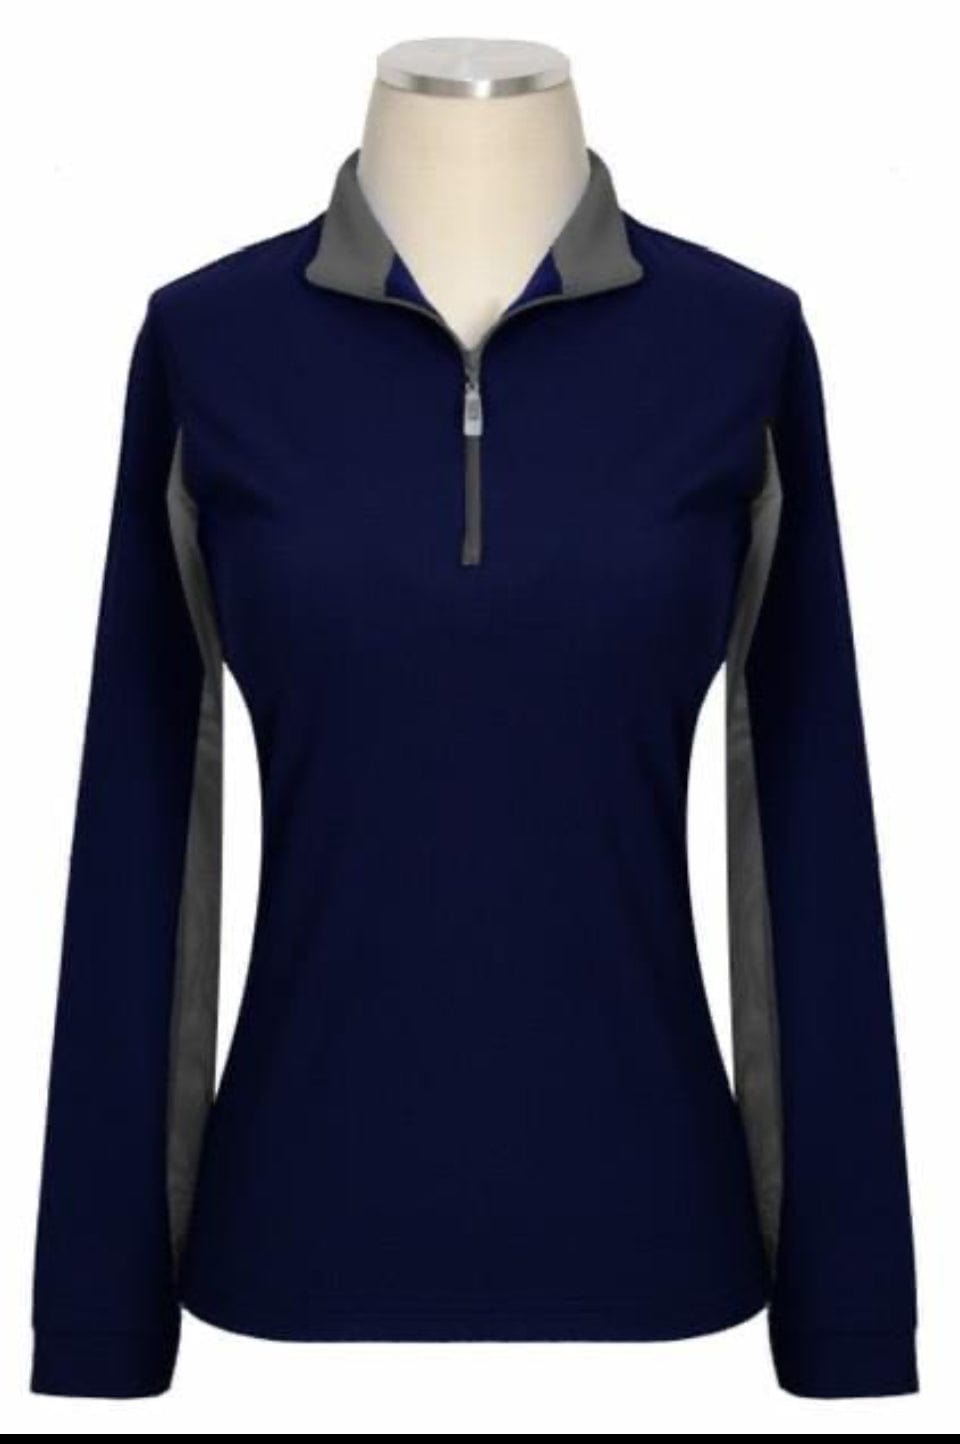 EIS Youth Shirt Navy/Grey EIS- Sun Shirts Youth Small 4-6 equestrian team apparel online tack store mobile tack store custom farm apparel custom show stable clothing equestrian lifestyle horse show clothing riding clothes ETA Kids Equestrian Fashion | EIS Sun Shirts horses equestrian tack store